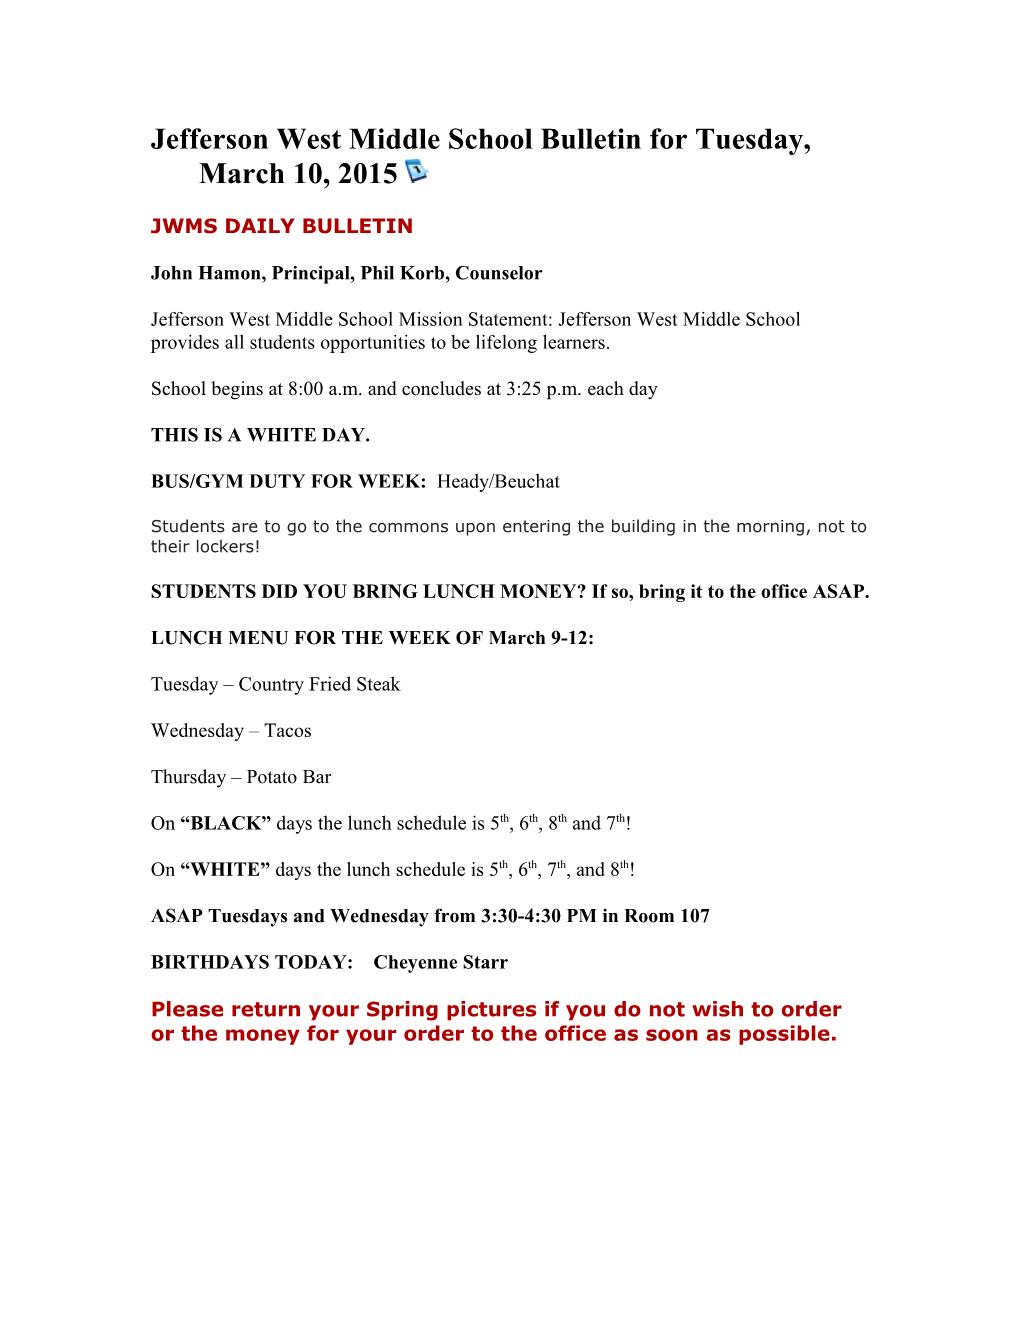 Jwms Daily Bulletin s2